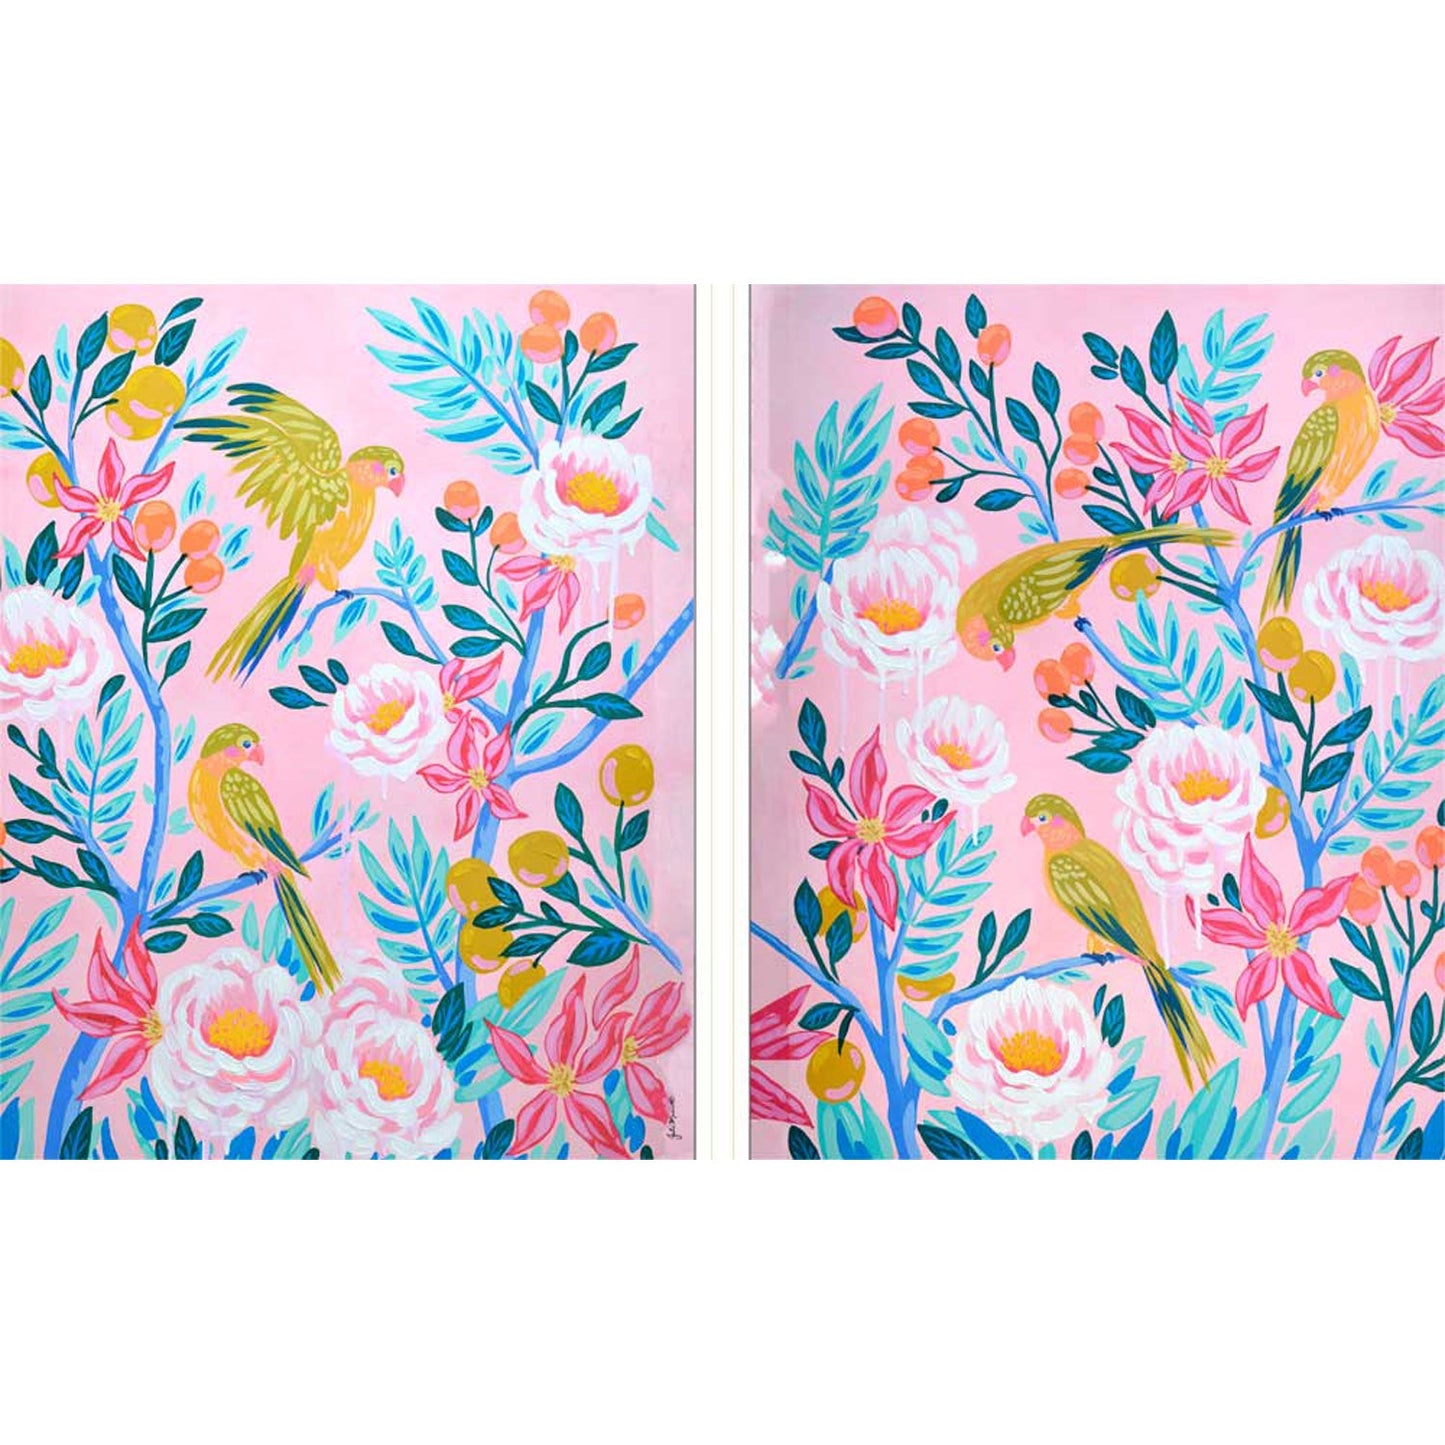 Woven Together Diptych Canvas Wall Art